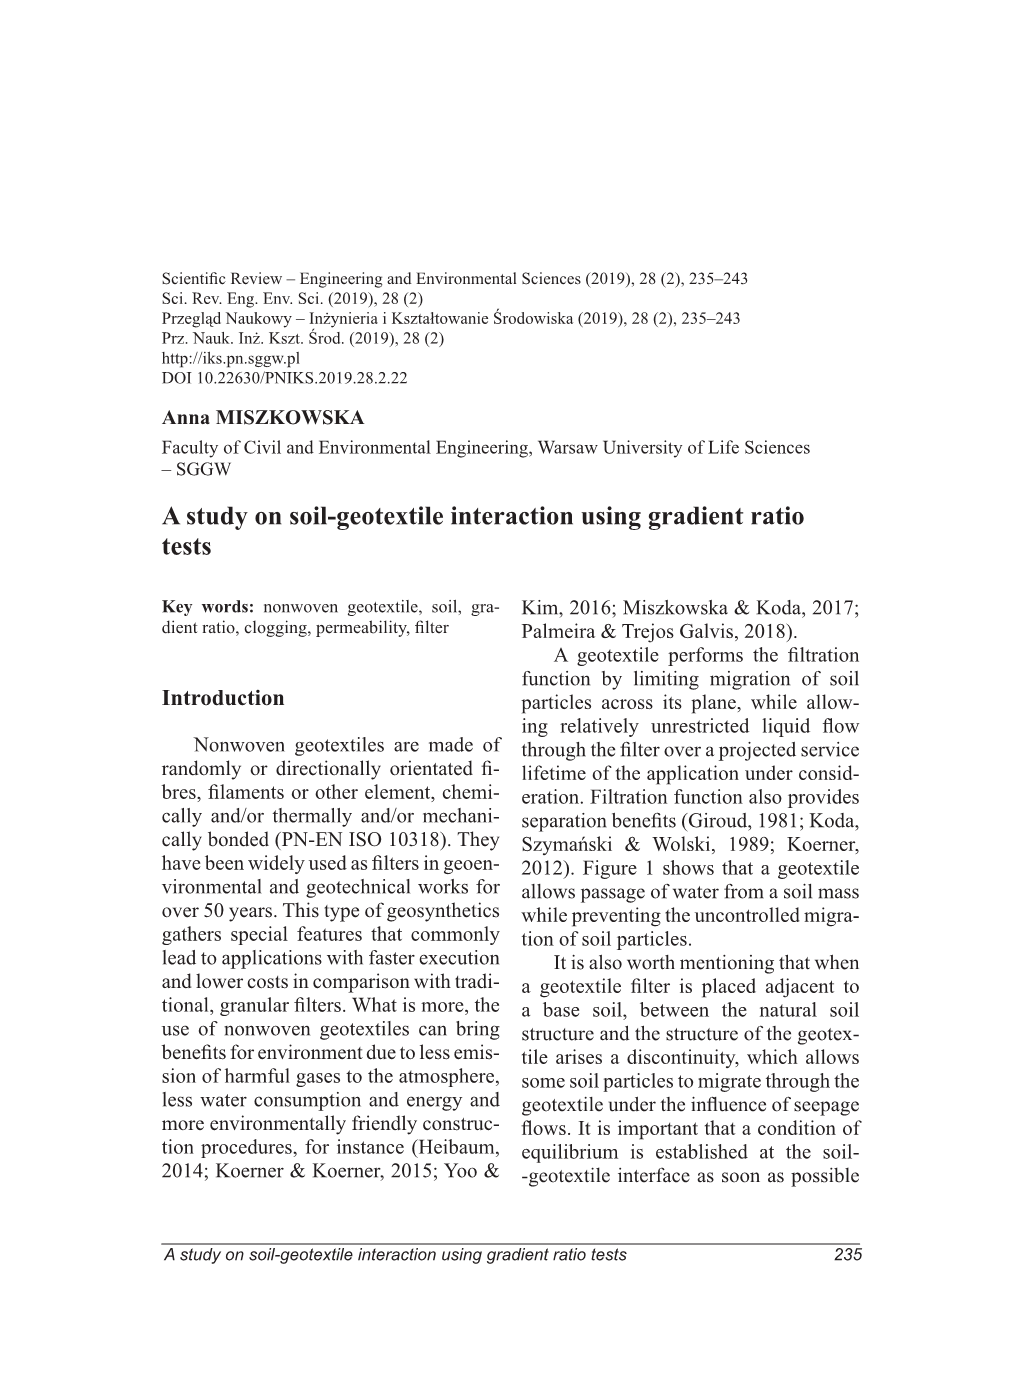 A Study on Soil-Geotextile Interaction Using Gradient Ratio Tests